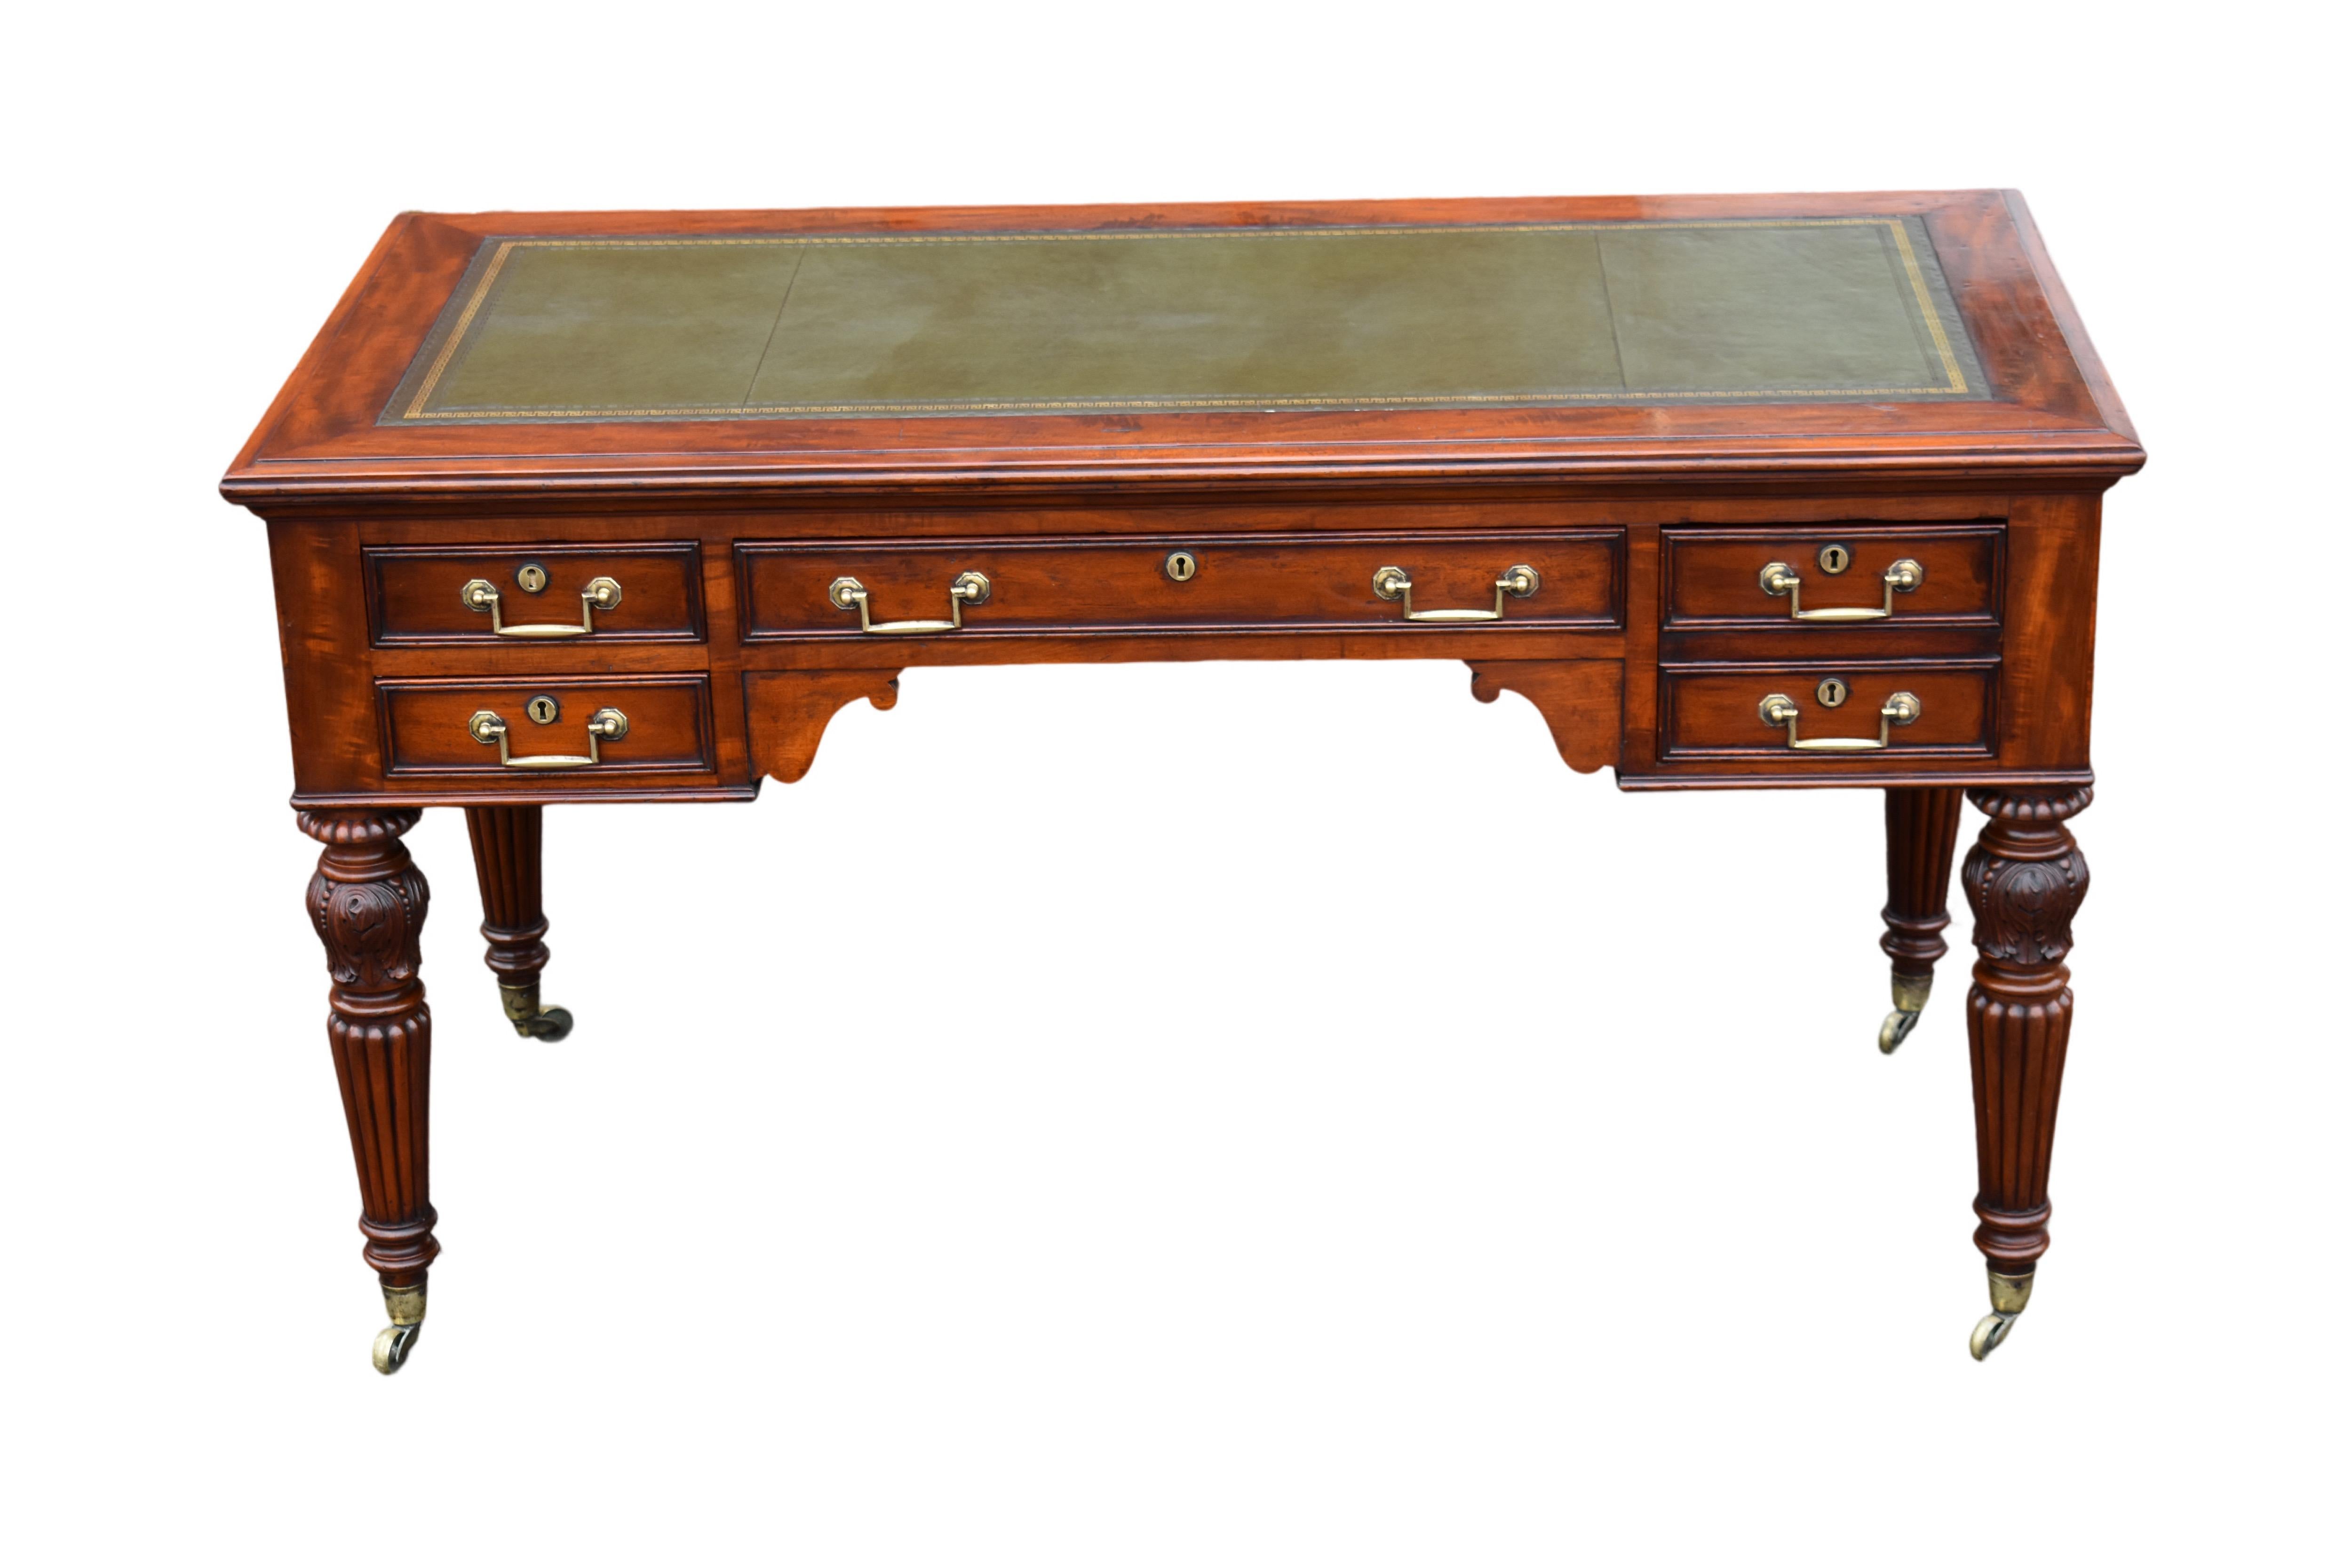 A good early 19th century mahogany campaign library- writing table.
The front facing side with twin shallow drawers to the left hand side, wide drawer in the centre and double fronted deep drawer on the right.
Dummy drawers to the rear.
The green